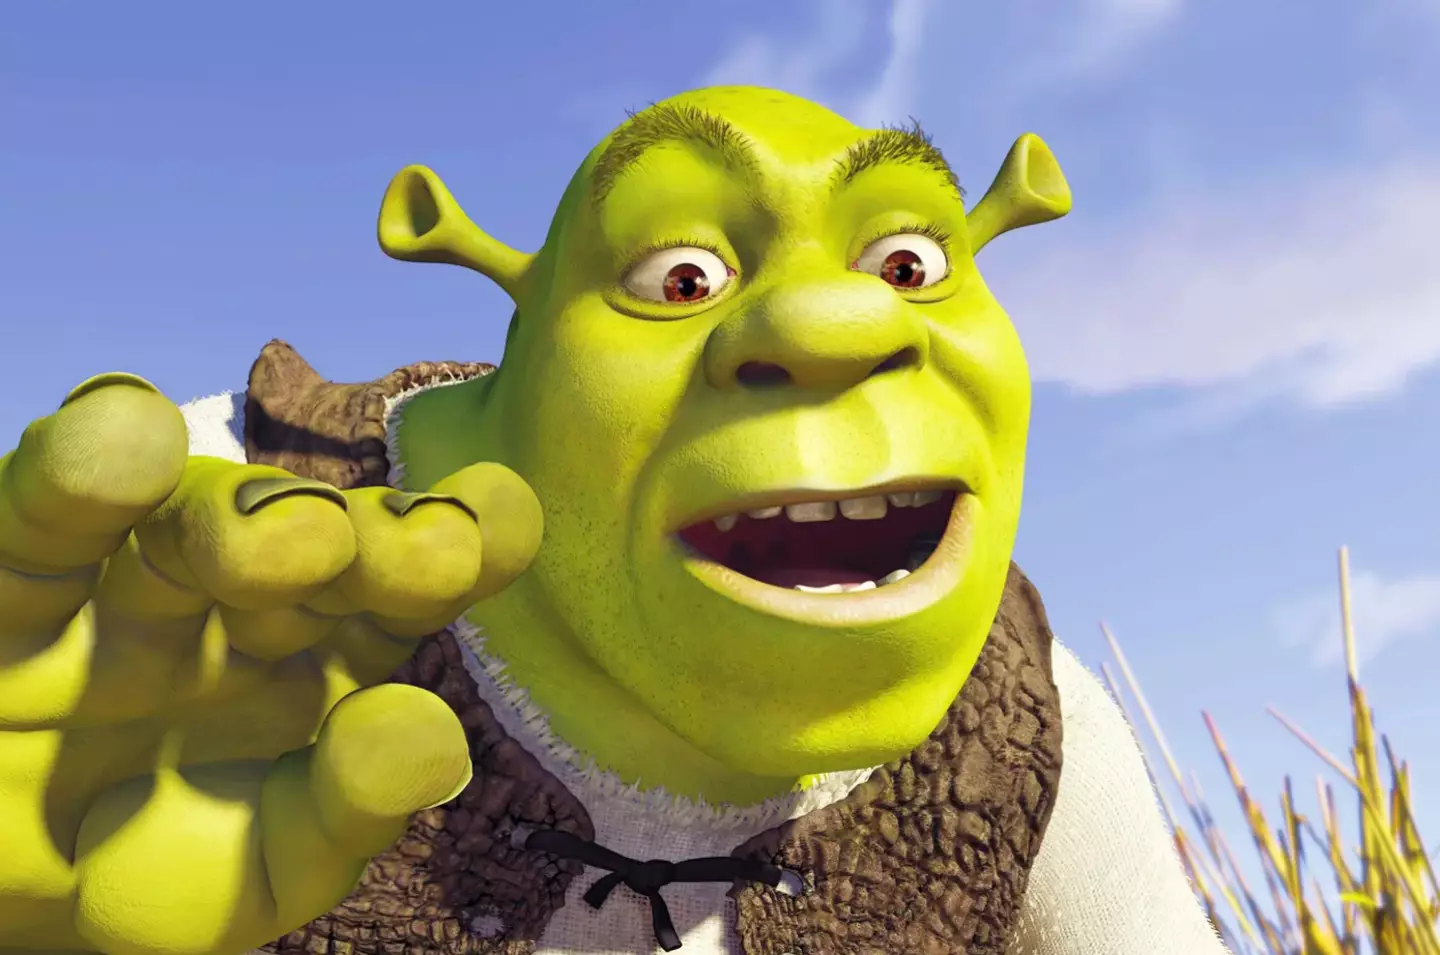 Shrek X Crocs is the ultimate crossover.